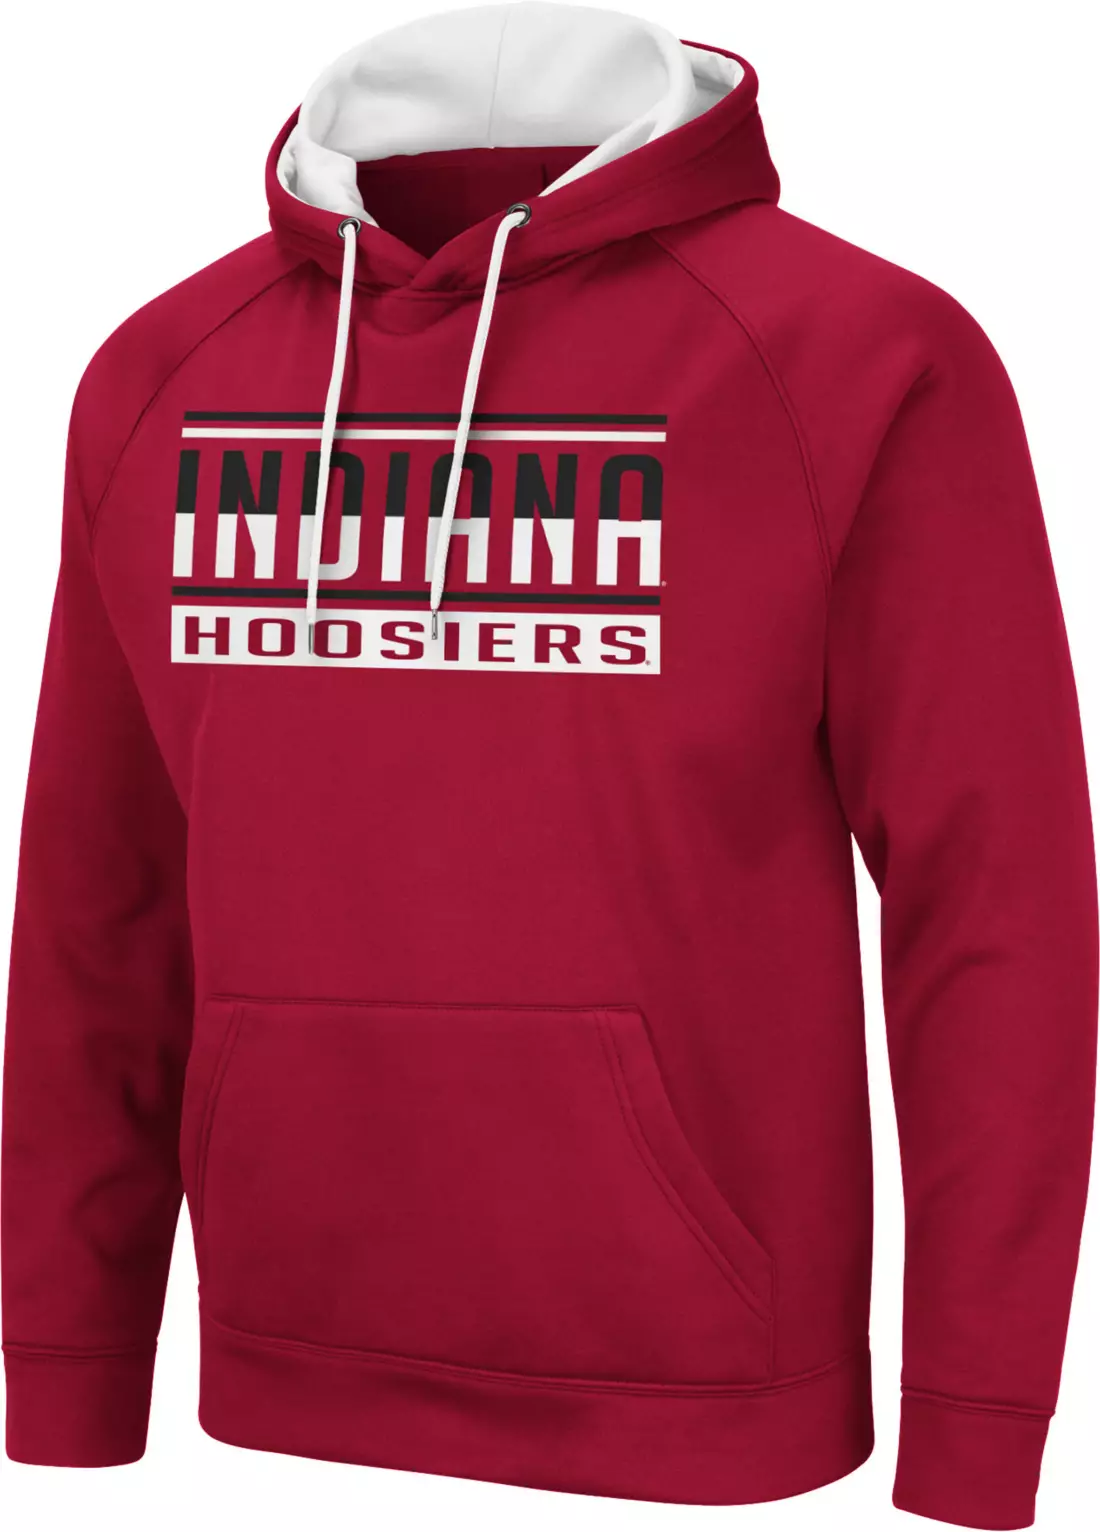 Colosseum Men’s Indiana Hoosiers Crimson Pullover Hoodie is on sale for $9.07